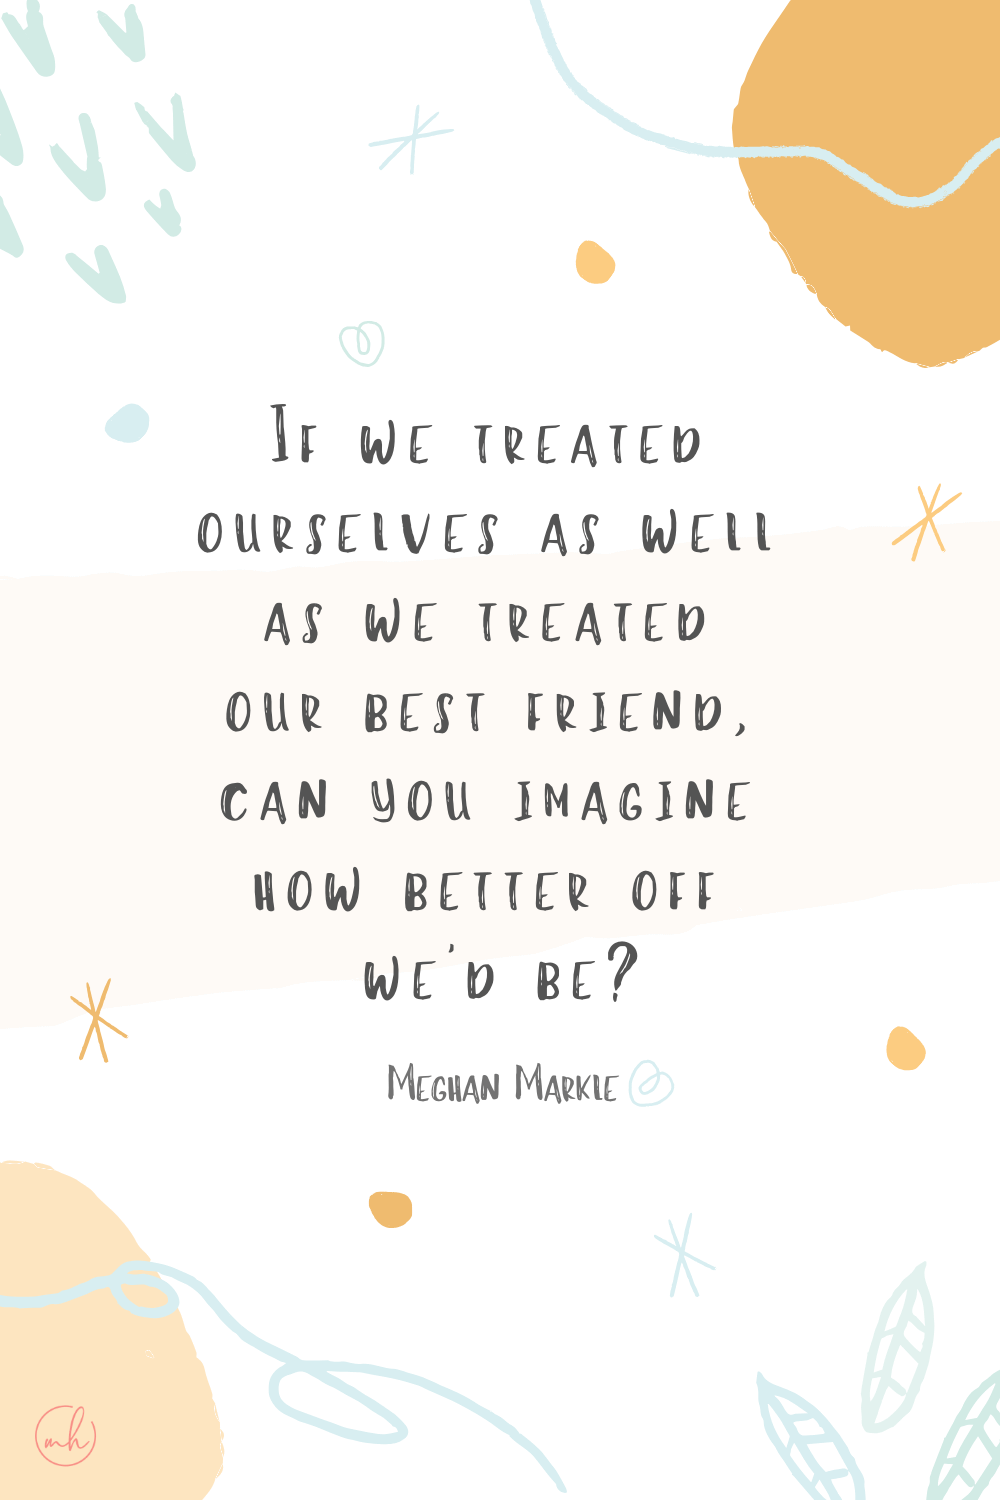 "If we treated ourselves as well as we treated our best friend, can you imagine how better off we would be?” – Meghan Markle